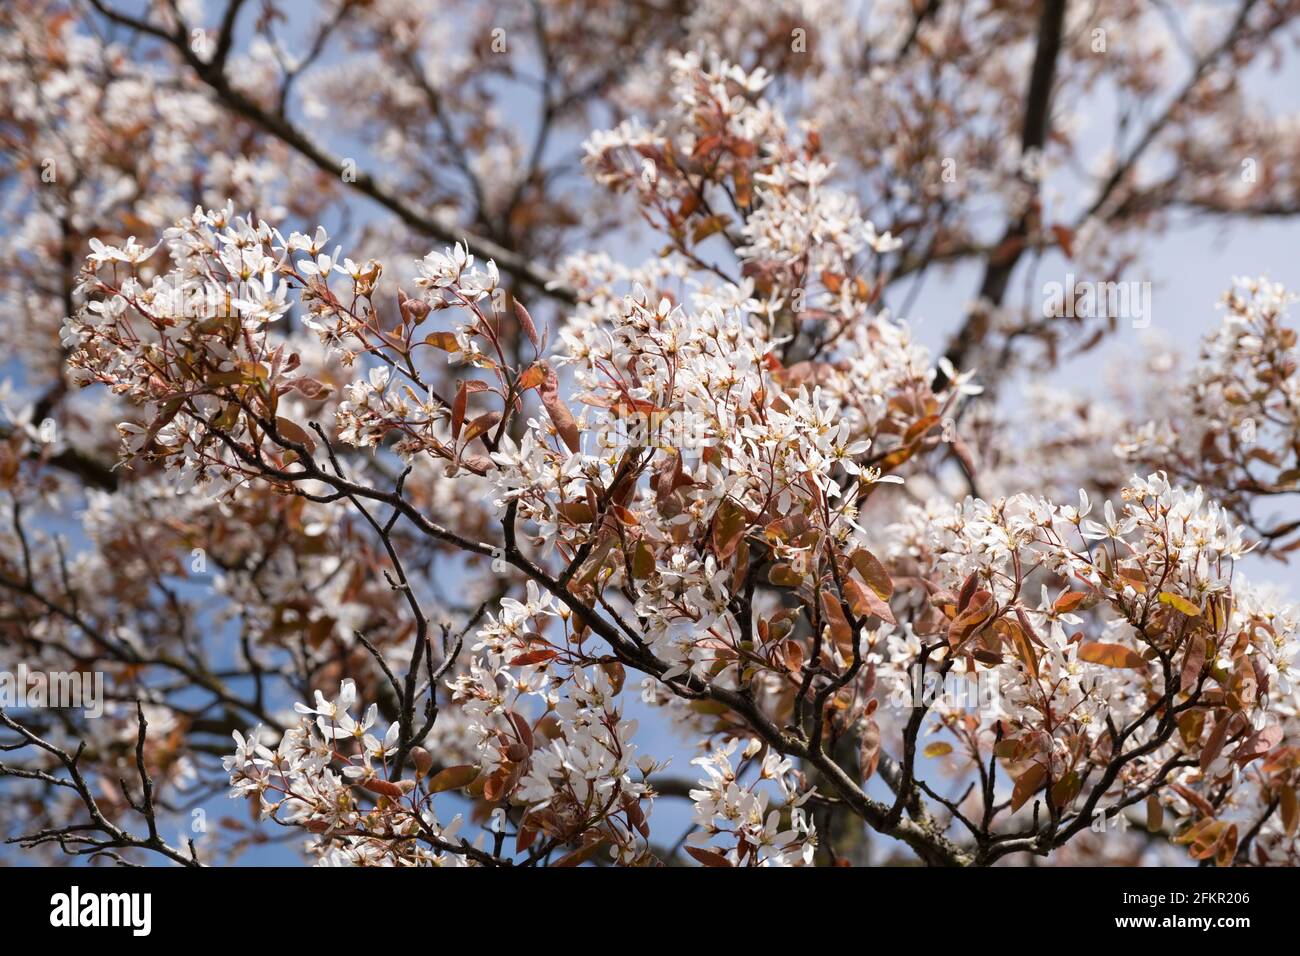 Pink white Blossom of the Amelanchier tree, also known as shadbush or juneberry, at blue sky in spring Stock Photo